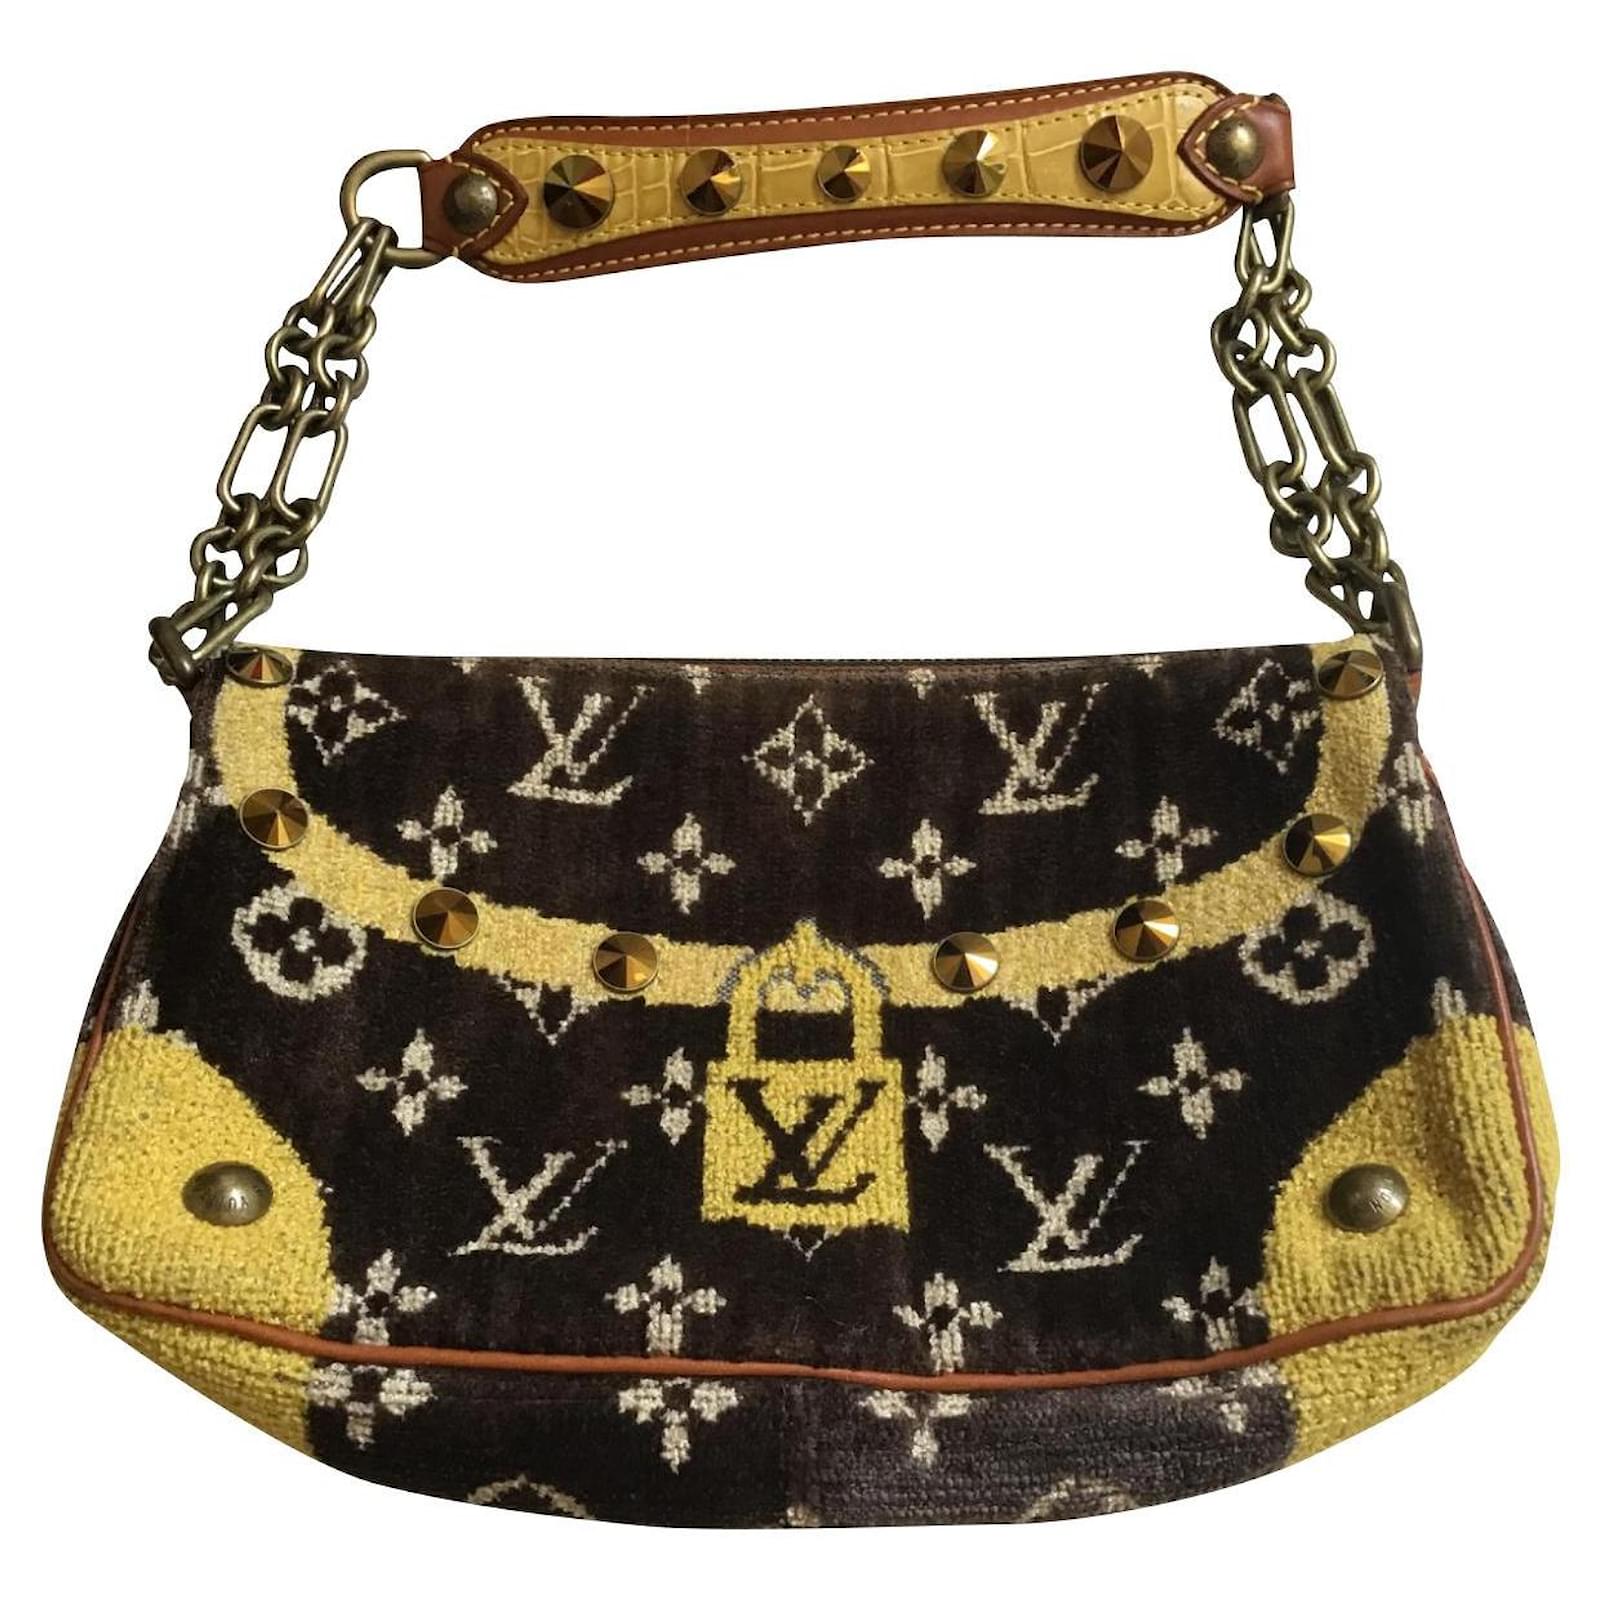 Rare and Limited Edition Louis Vuitton Bags, Handbags and Accessories